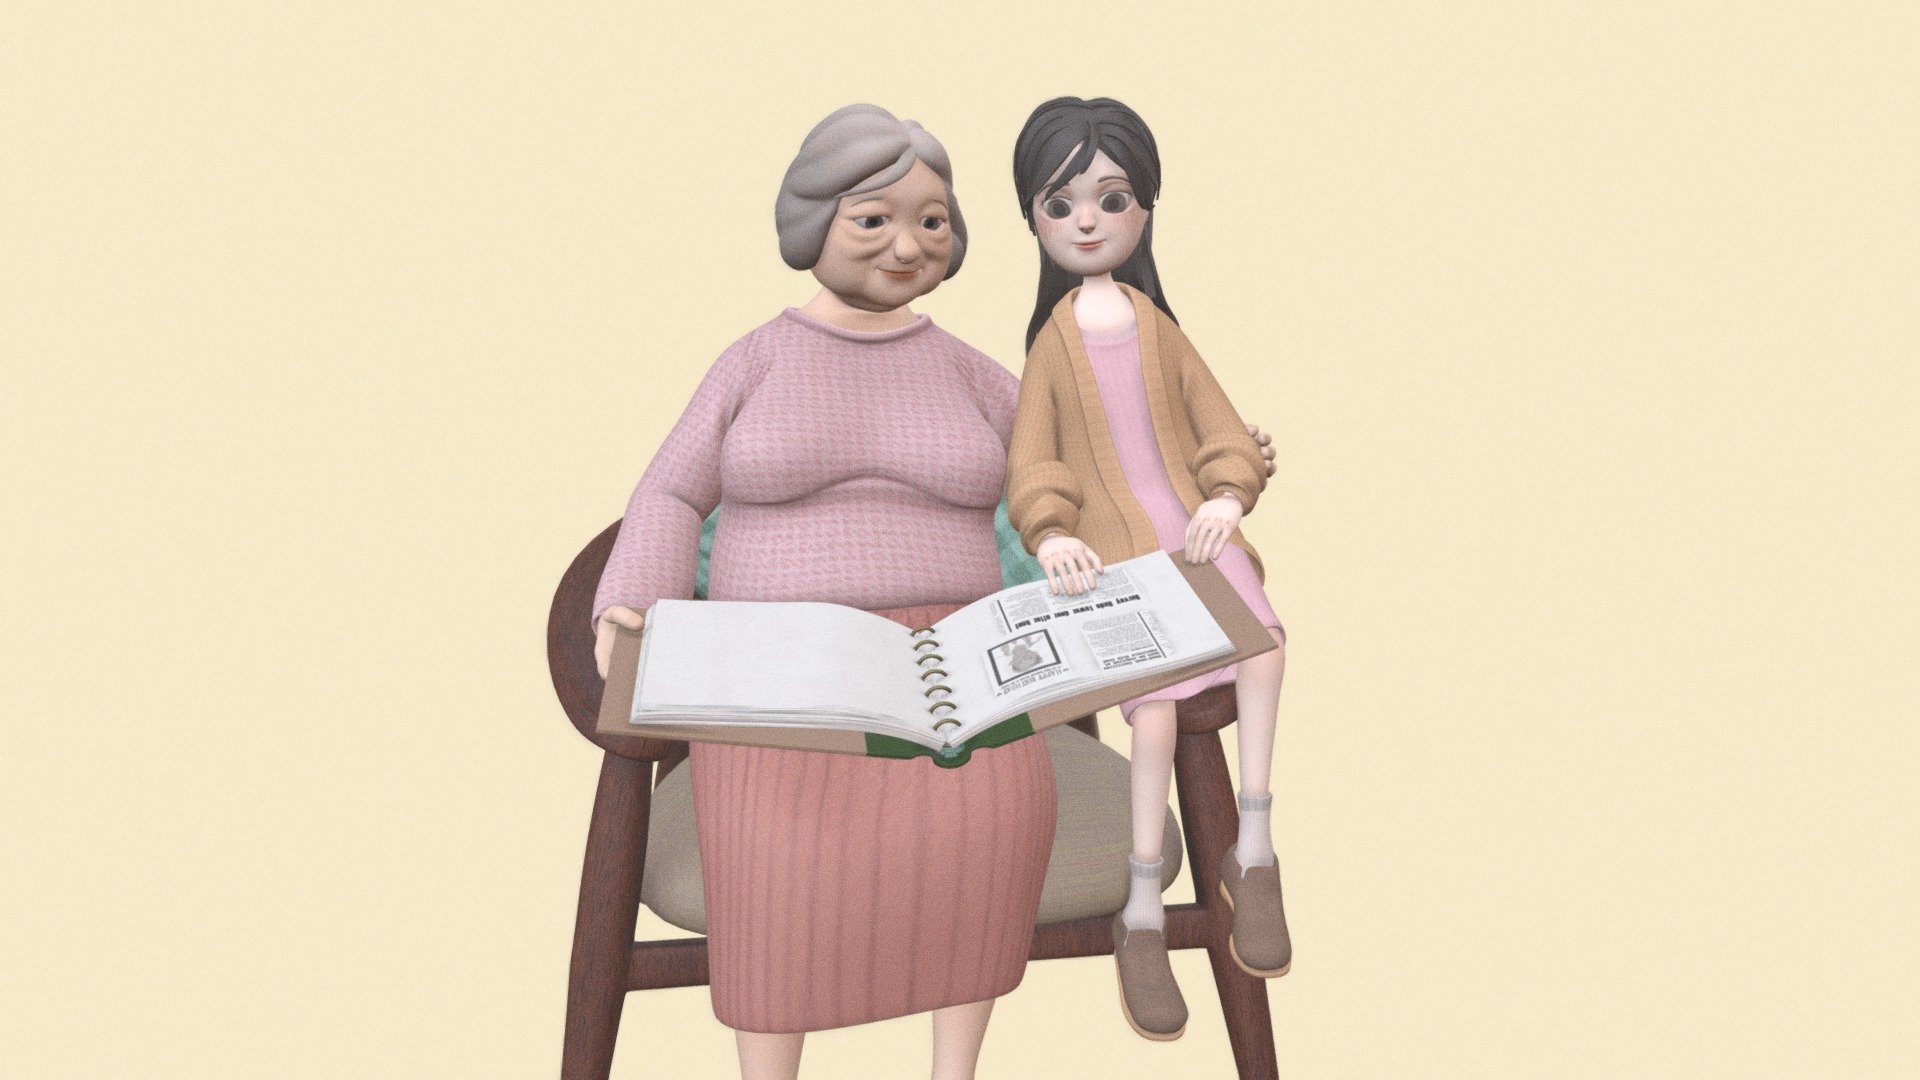 smoothed model of my thesis characters - grandma & kid - 3D model by congcongcong 3d model